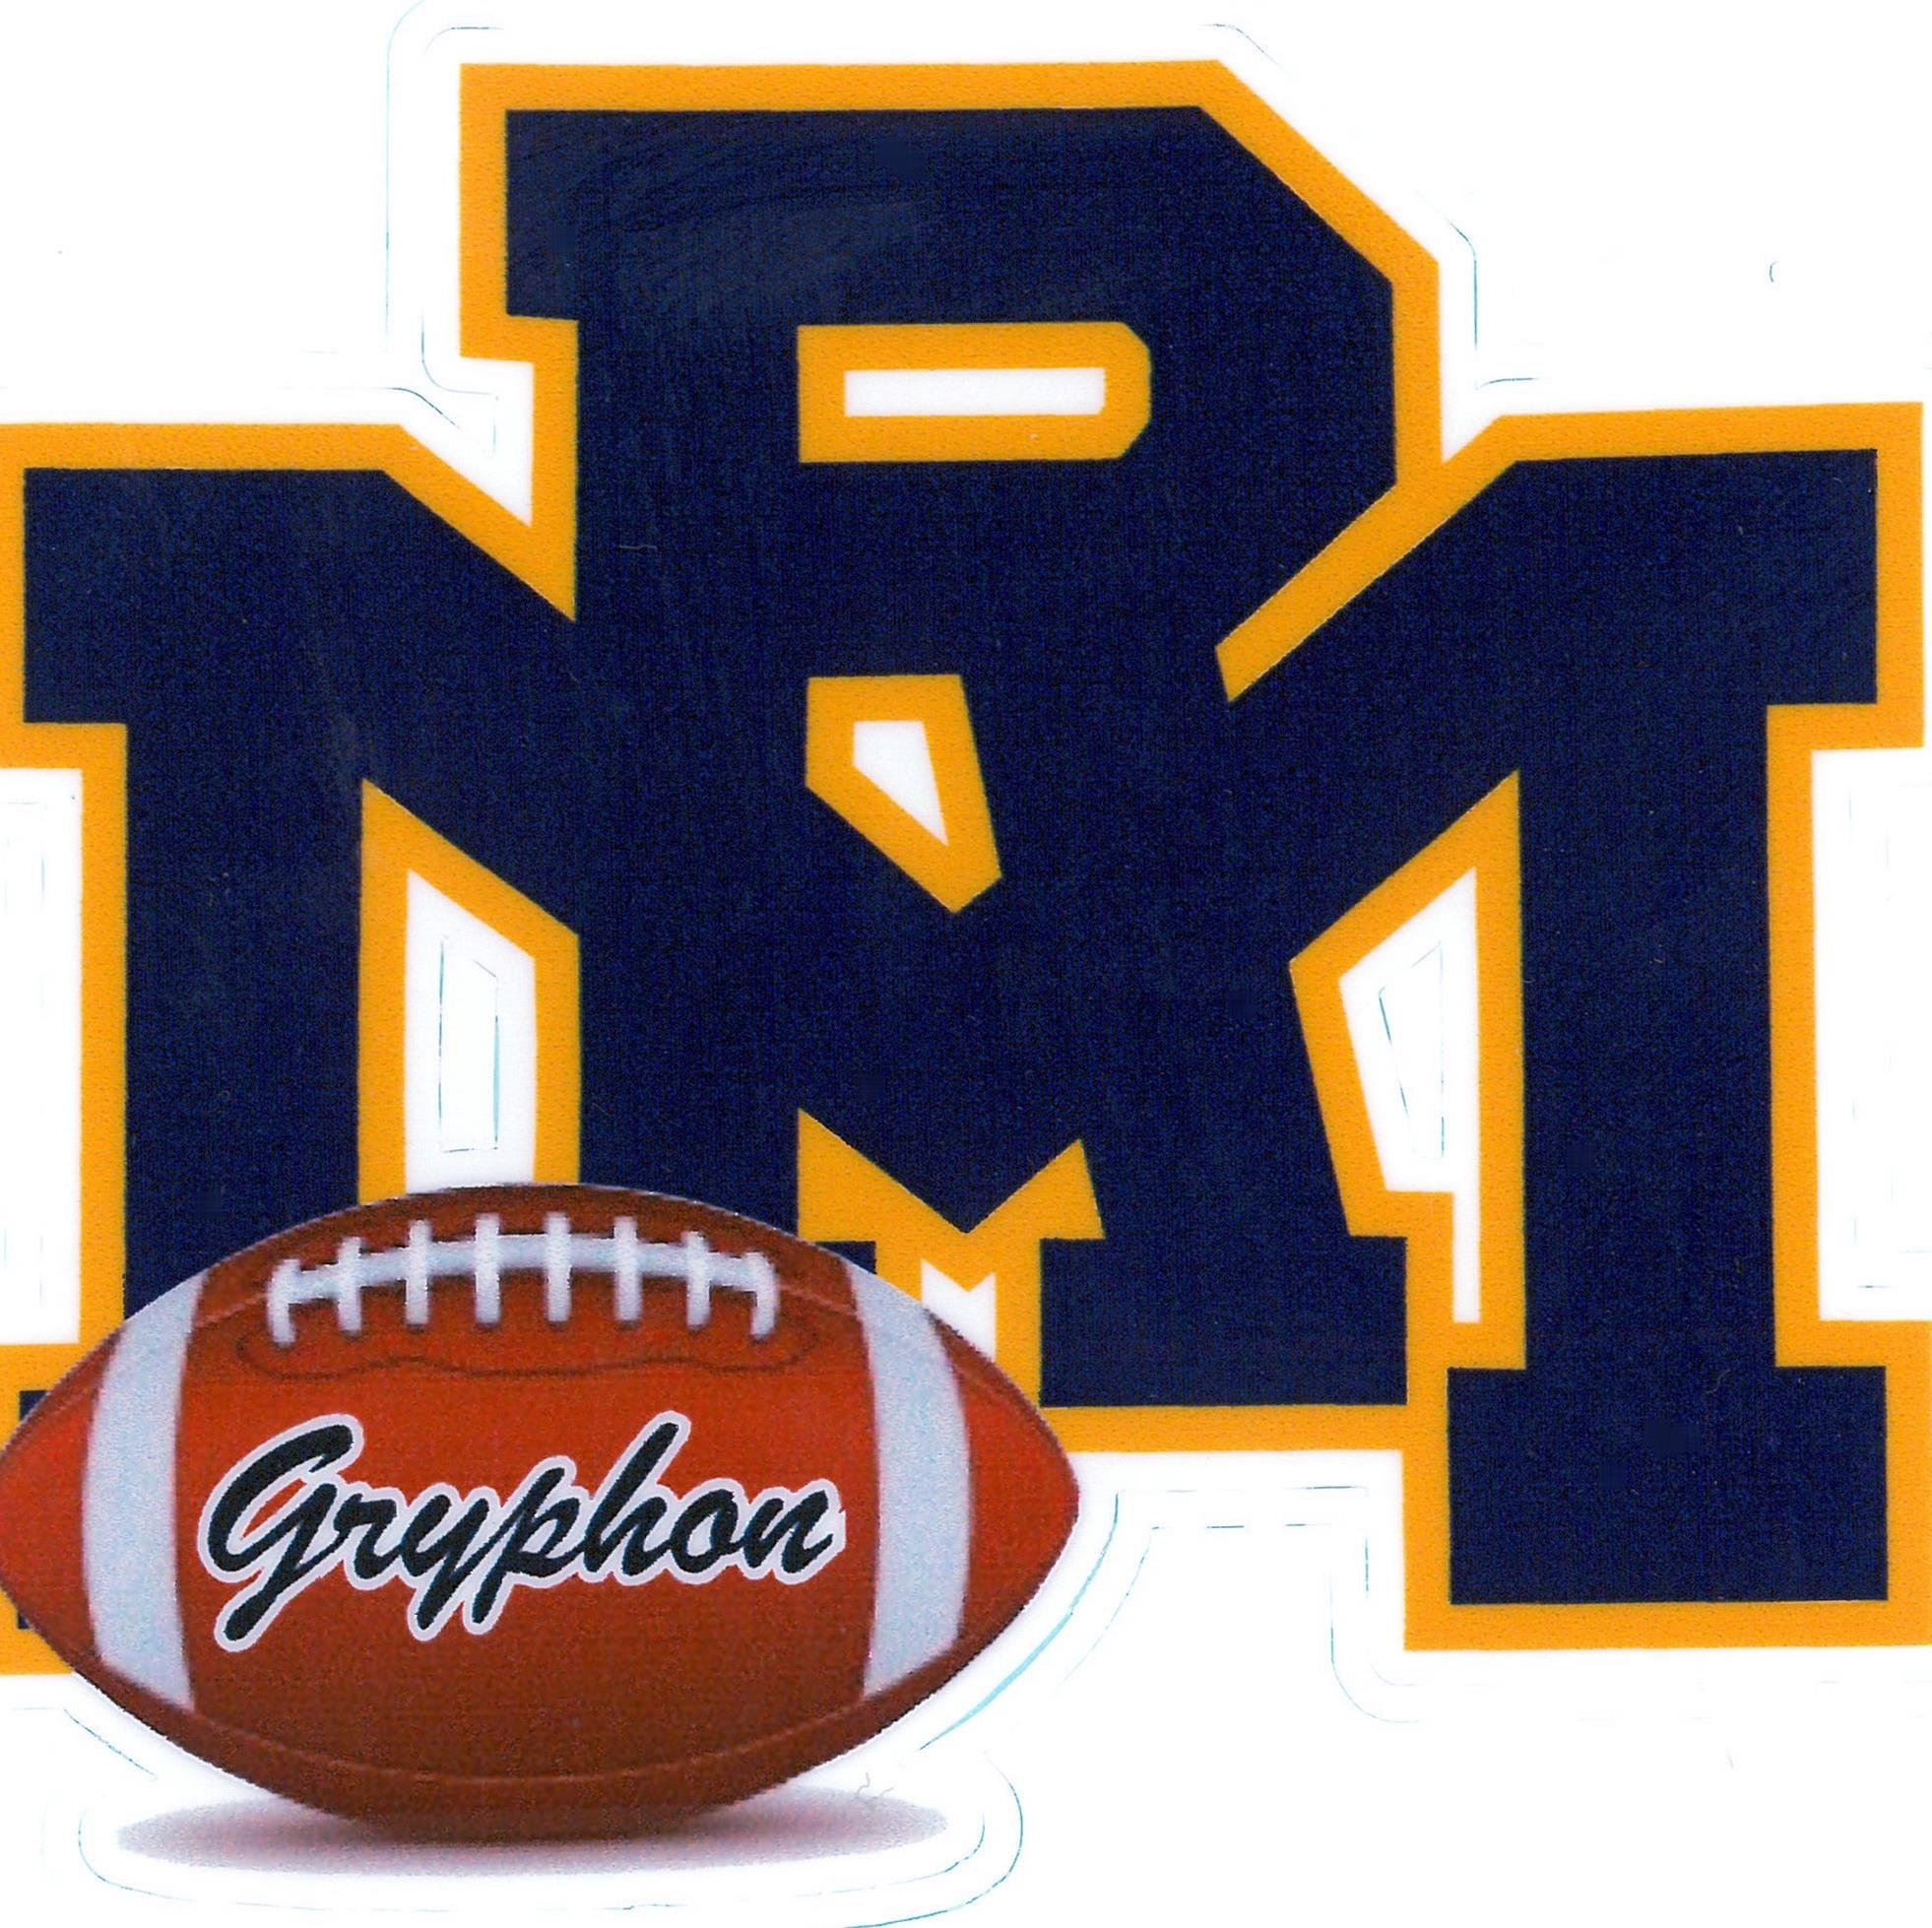 News & Information about the Rocky Mount High School Football Program. NCHSAA State Champions - 1962 (4A), 1963 (4A) & 2015 (3A). #GoGryphons #GryphonPride